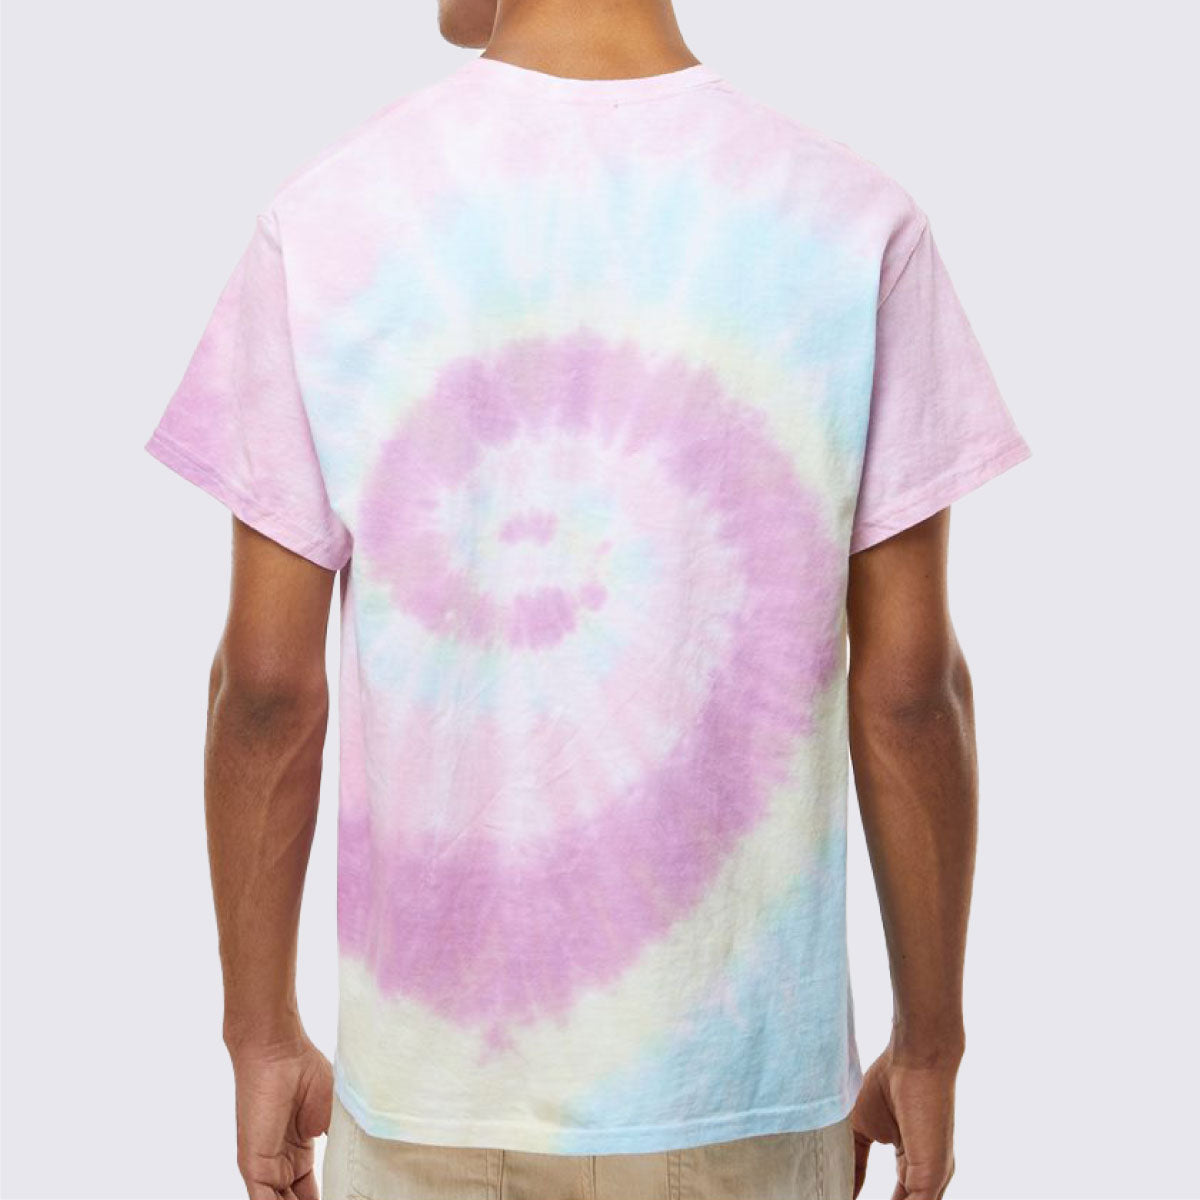 Am I Jacked Yet Multi-Color Tie-Dyed T-Shirt